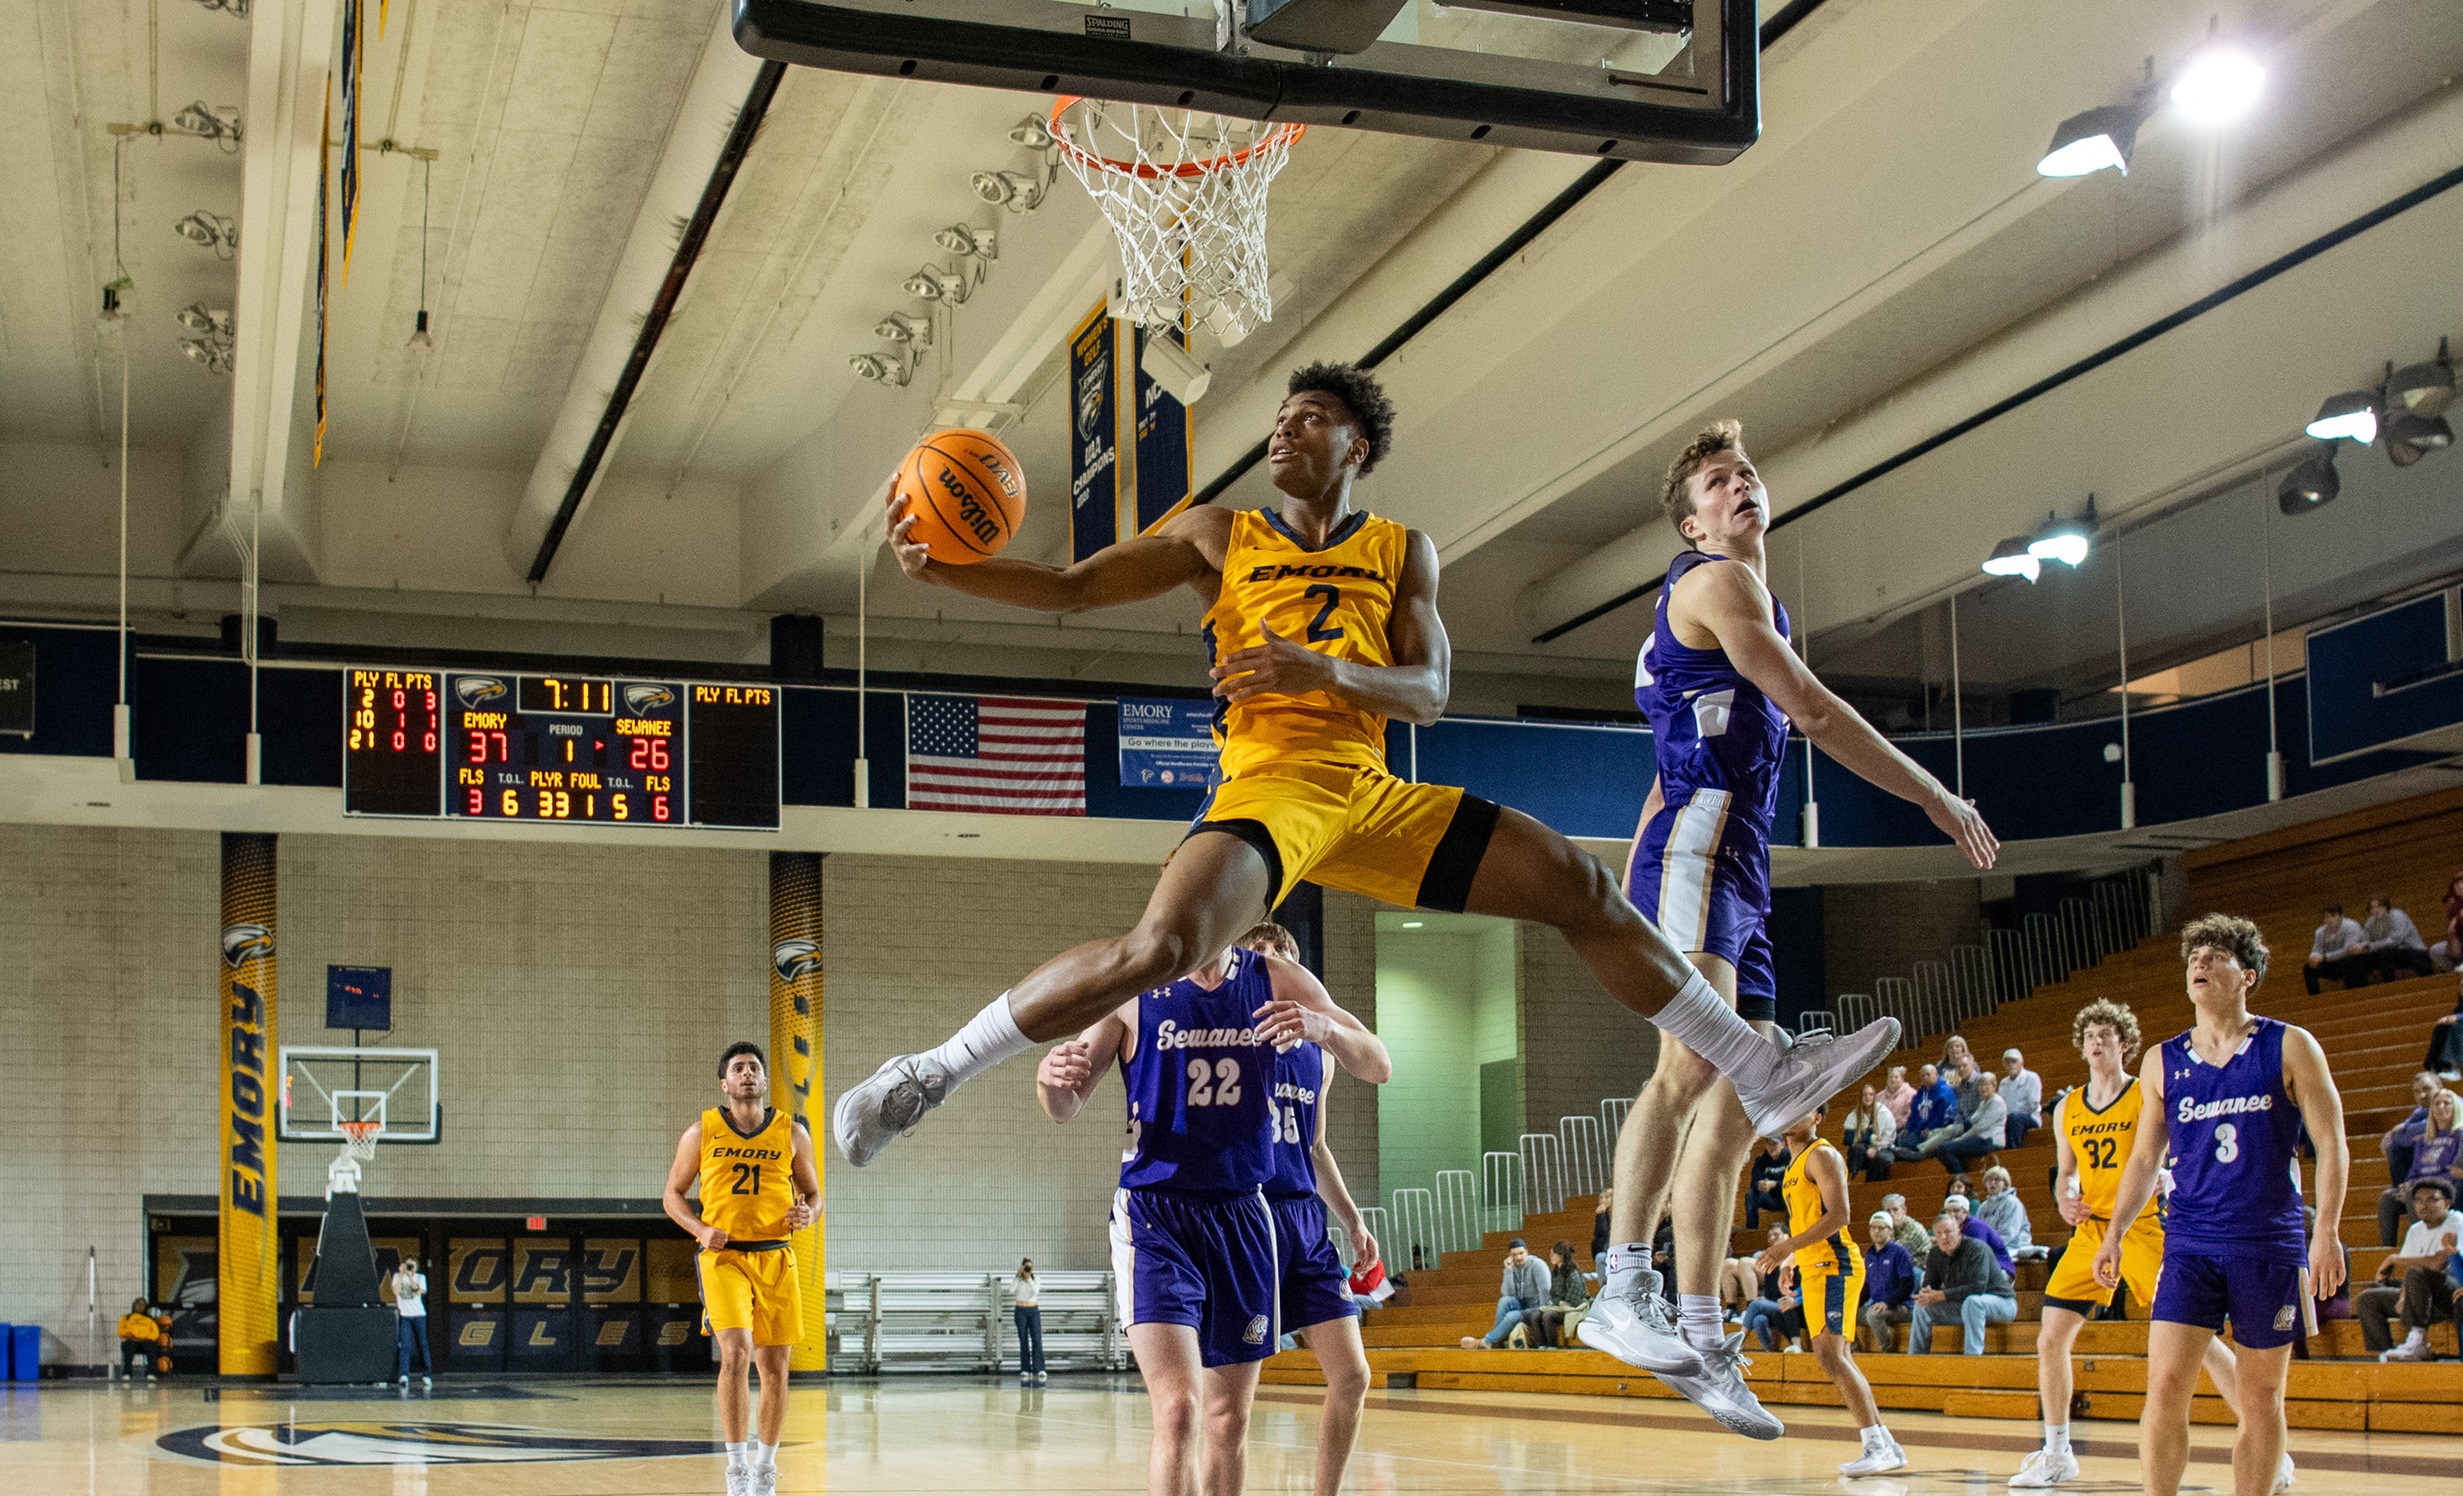 Men's Basketball Sets Assists Record in Home Opener; Dismantles Sewanee 109-72